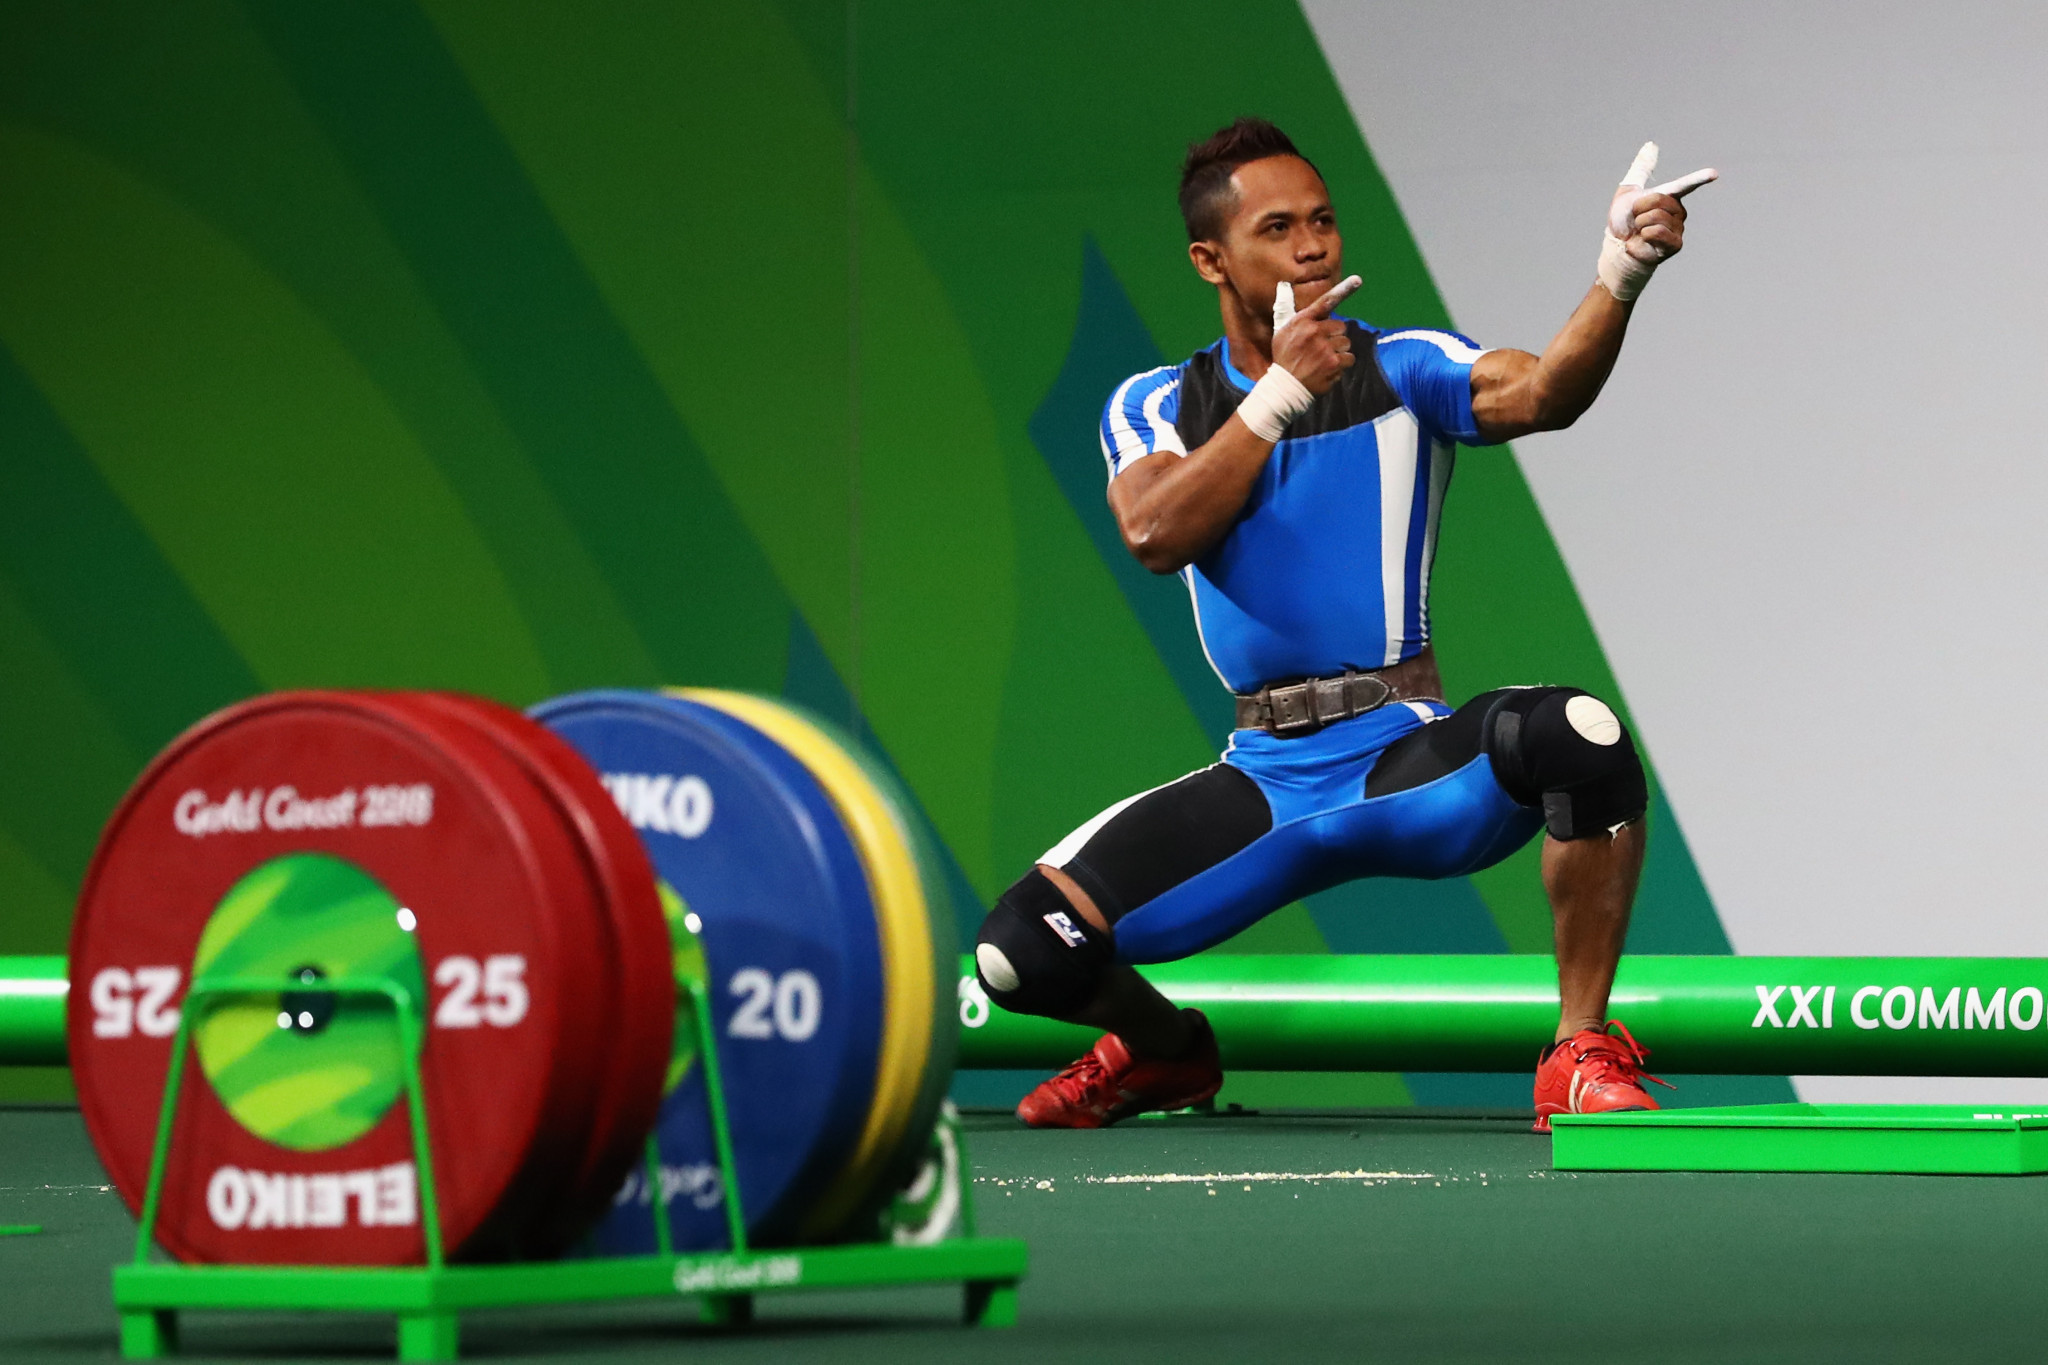 Malaysia’s Muhammad Azroy Hazalwa Izhar Ahmad broke the Commonwealth Games record to win the men’s 56kg event ©Getty Images